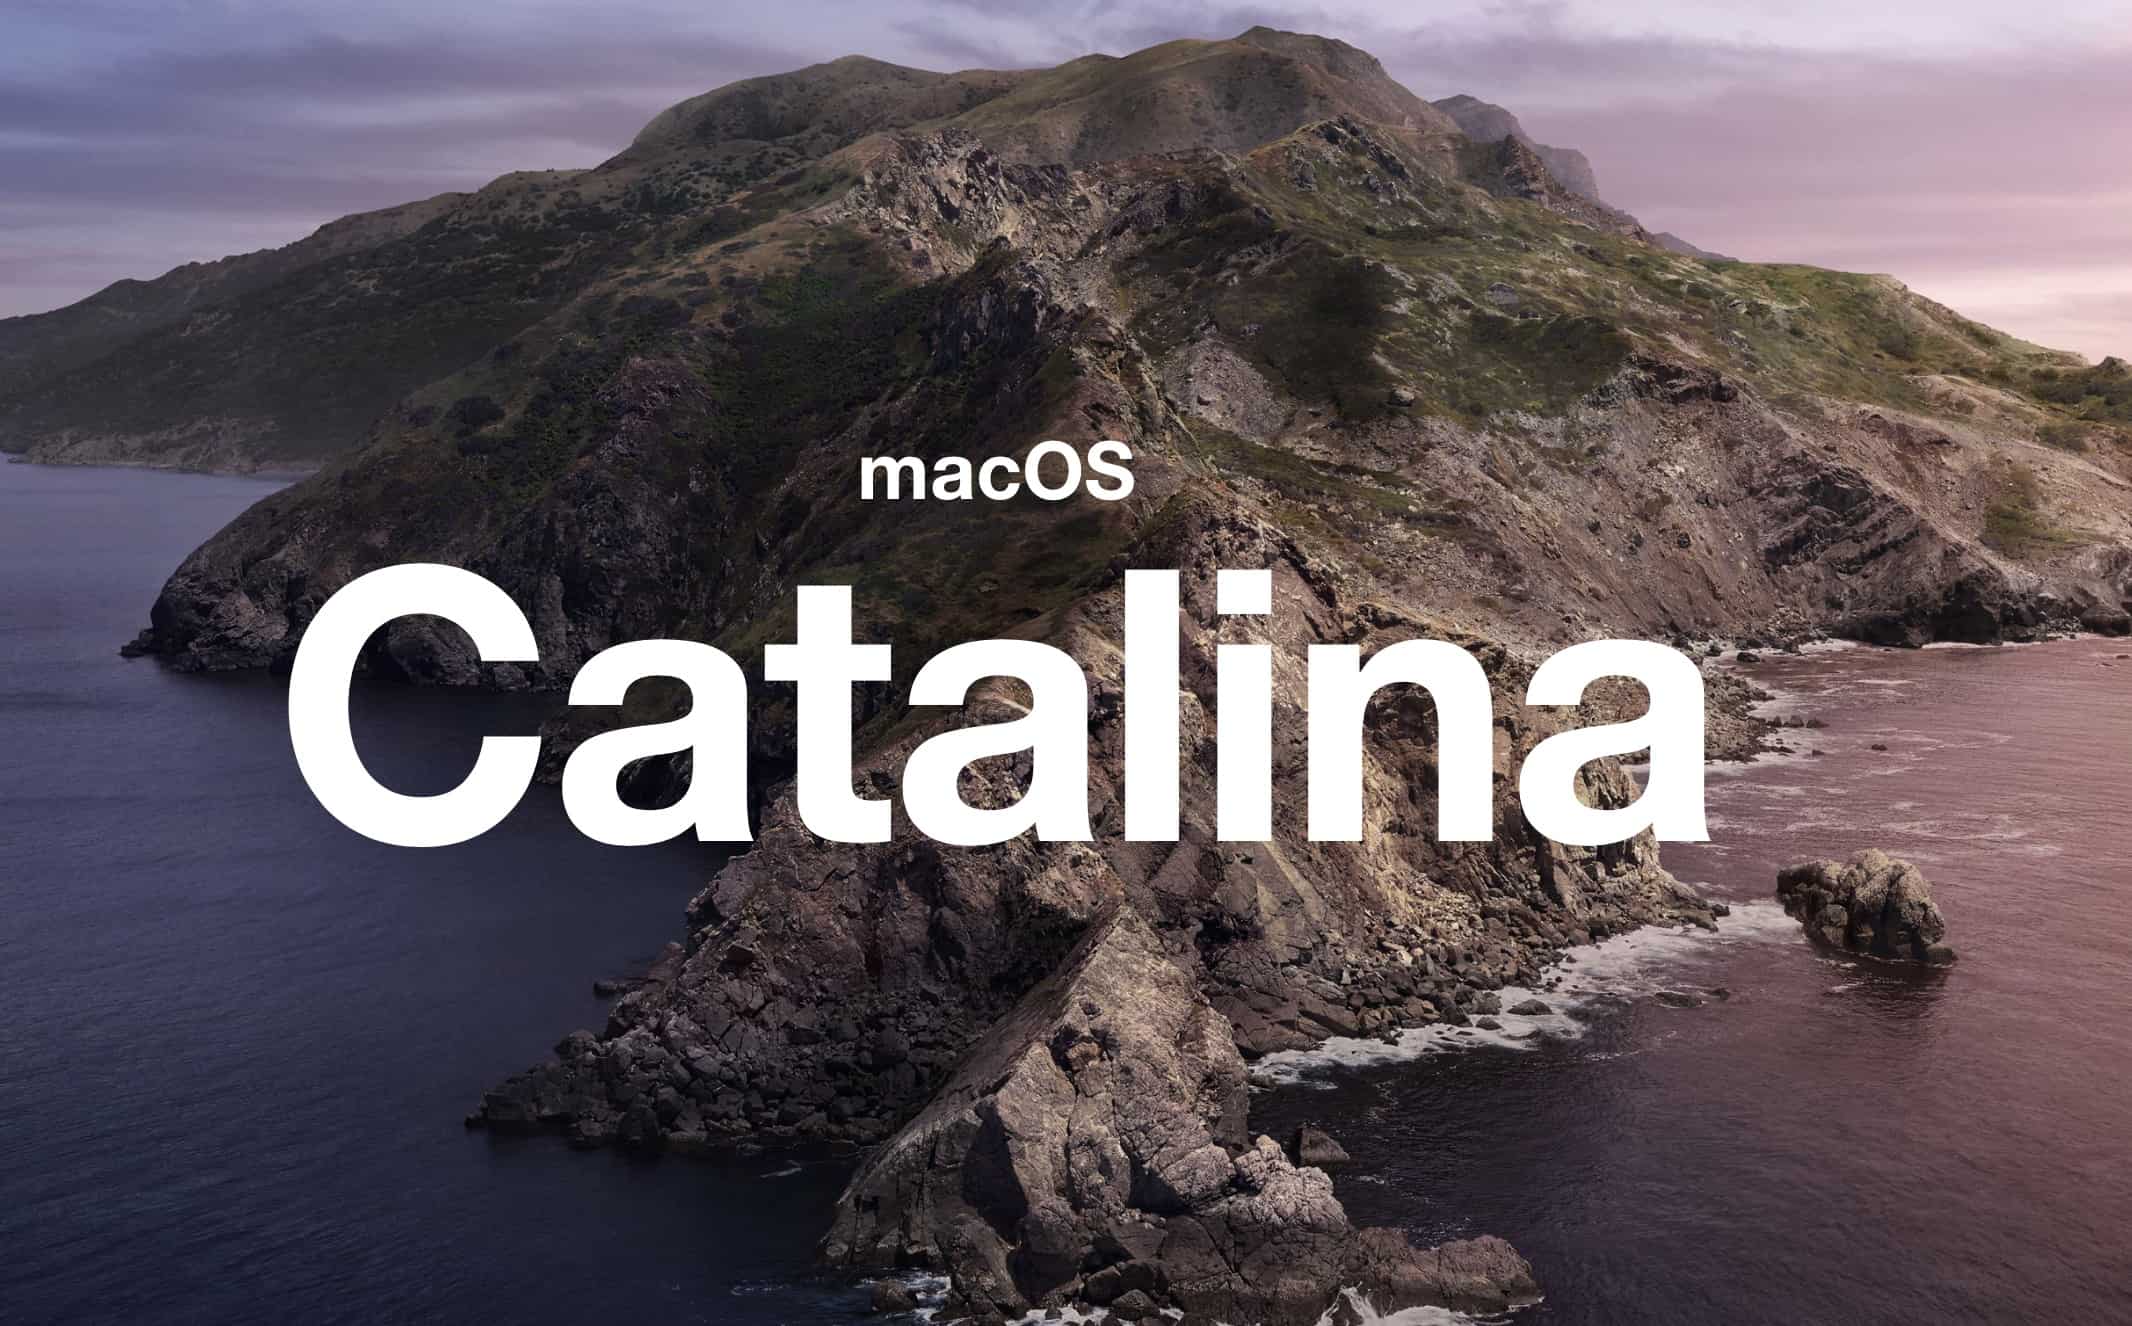 itunes for macos catalina 10.15 5 download